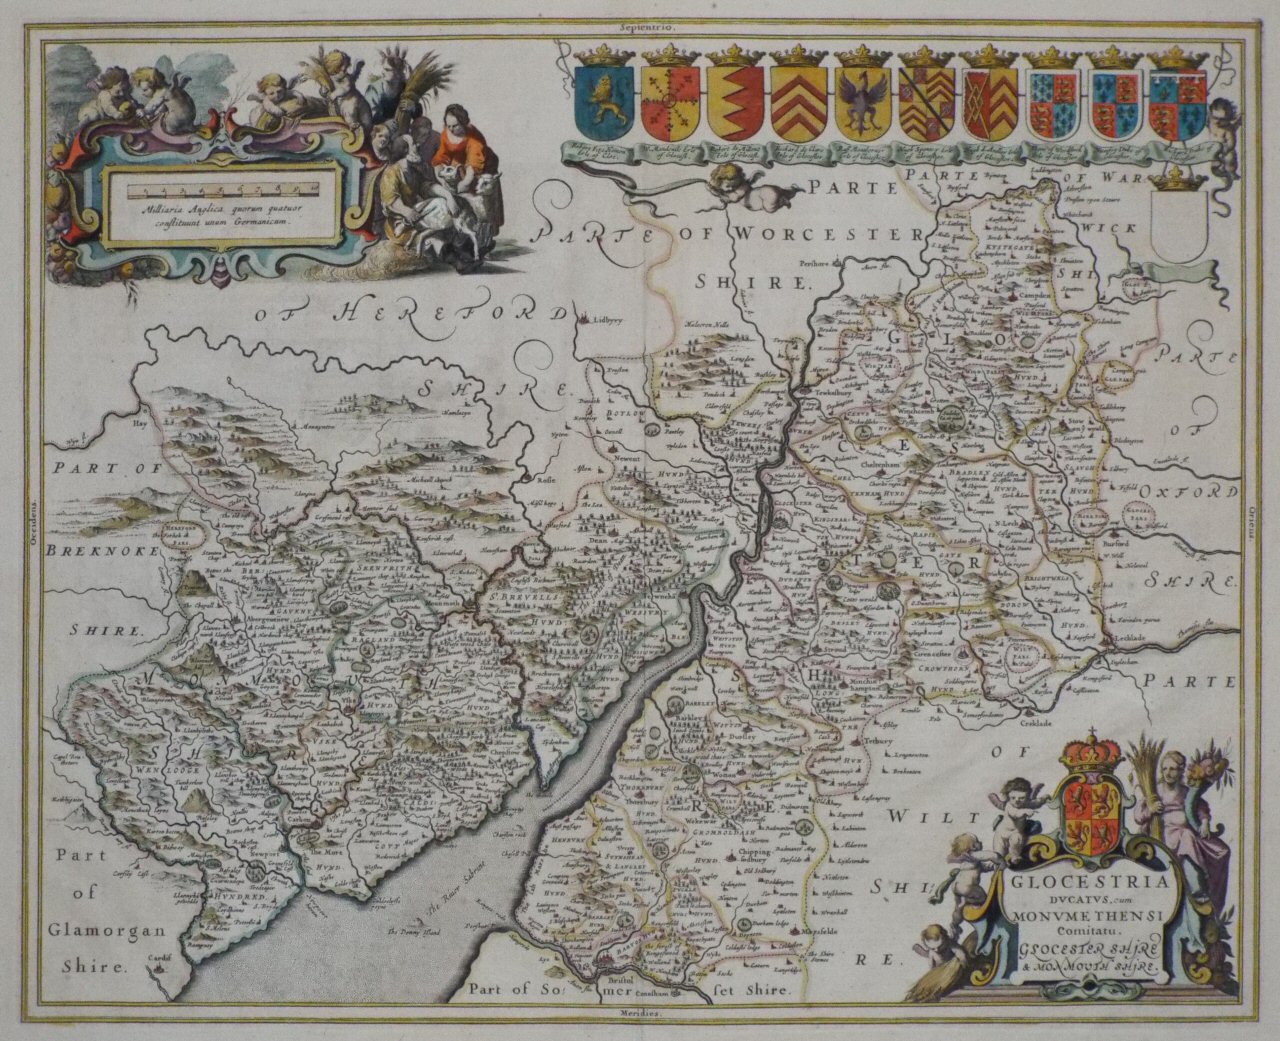 Map of Gloucestershire & Monmouthshire - Jansson